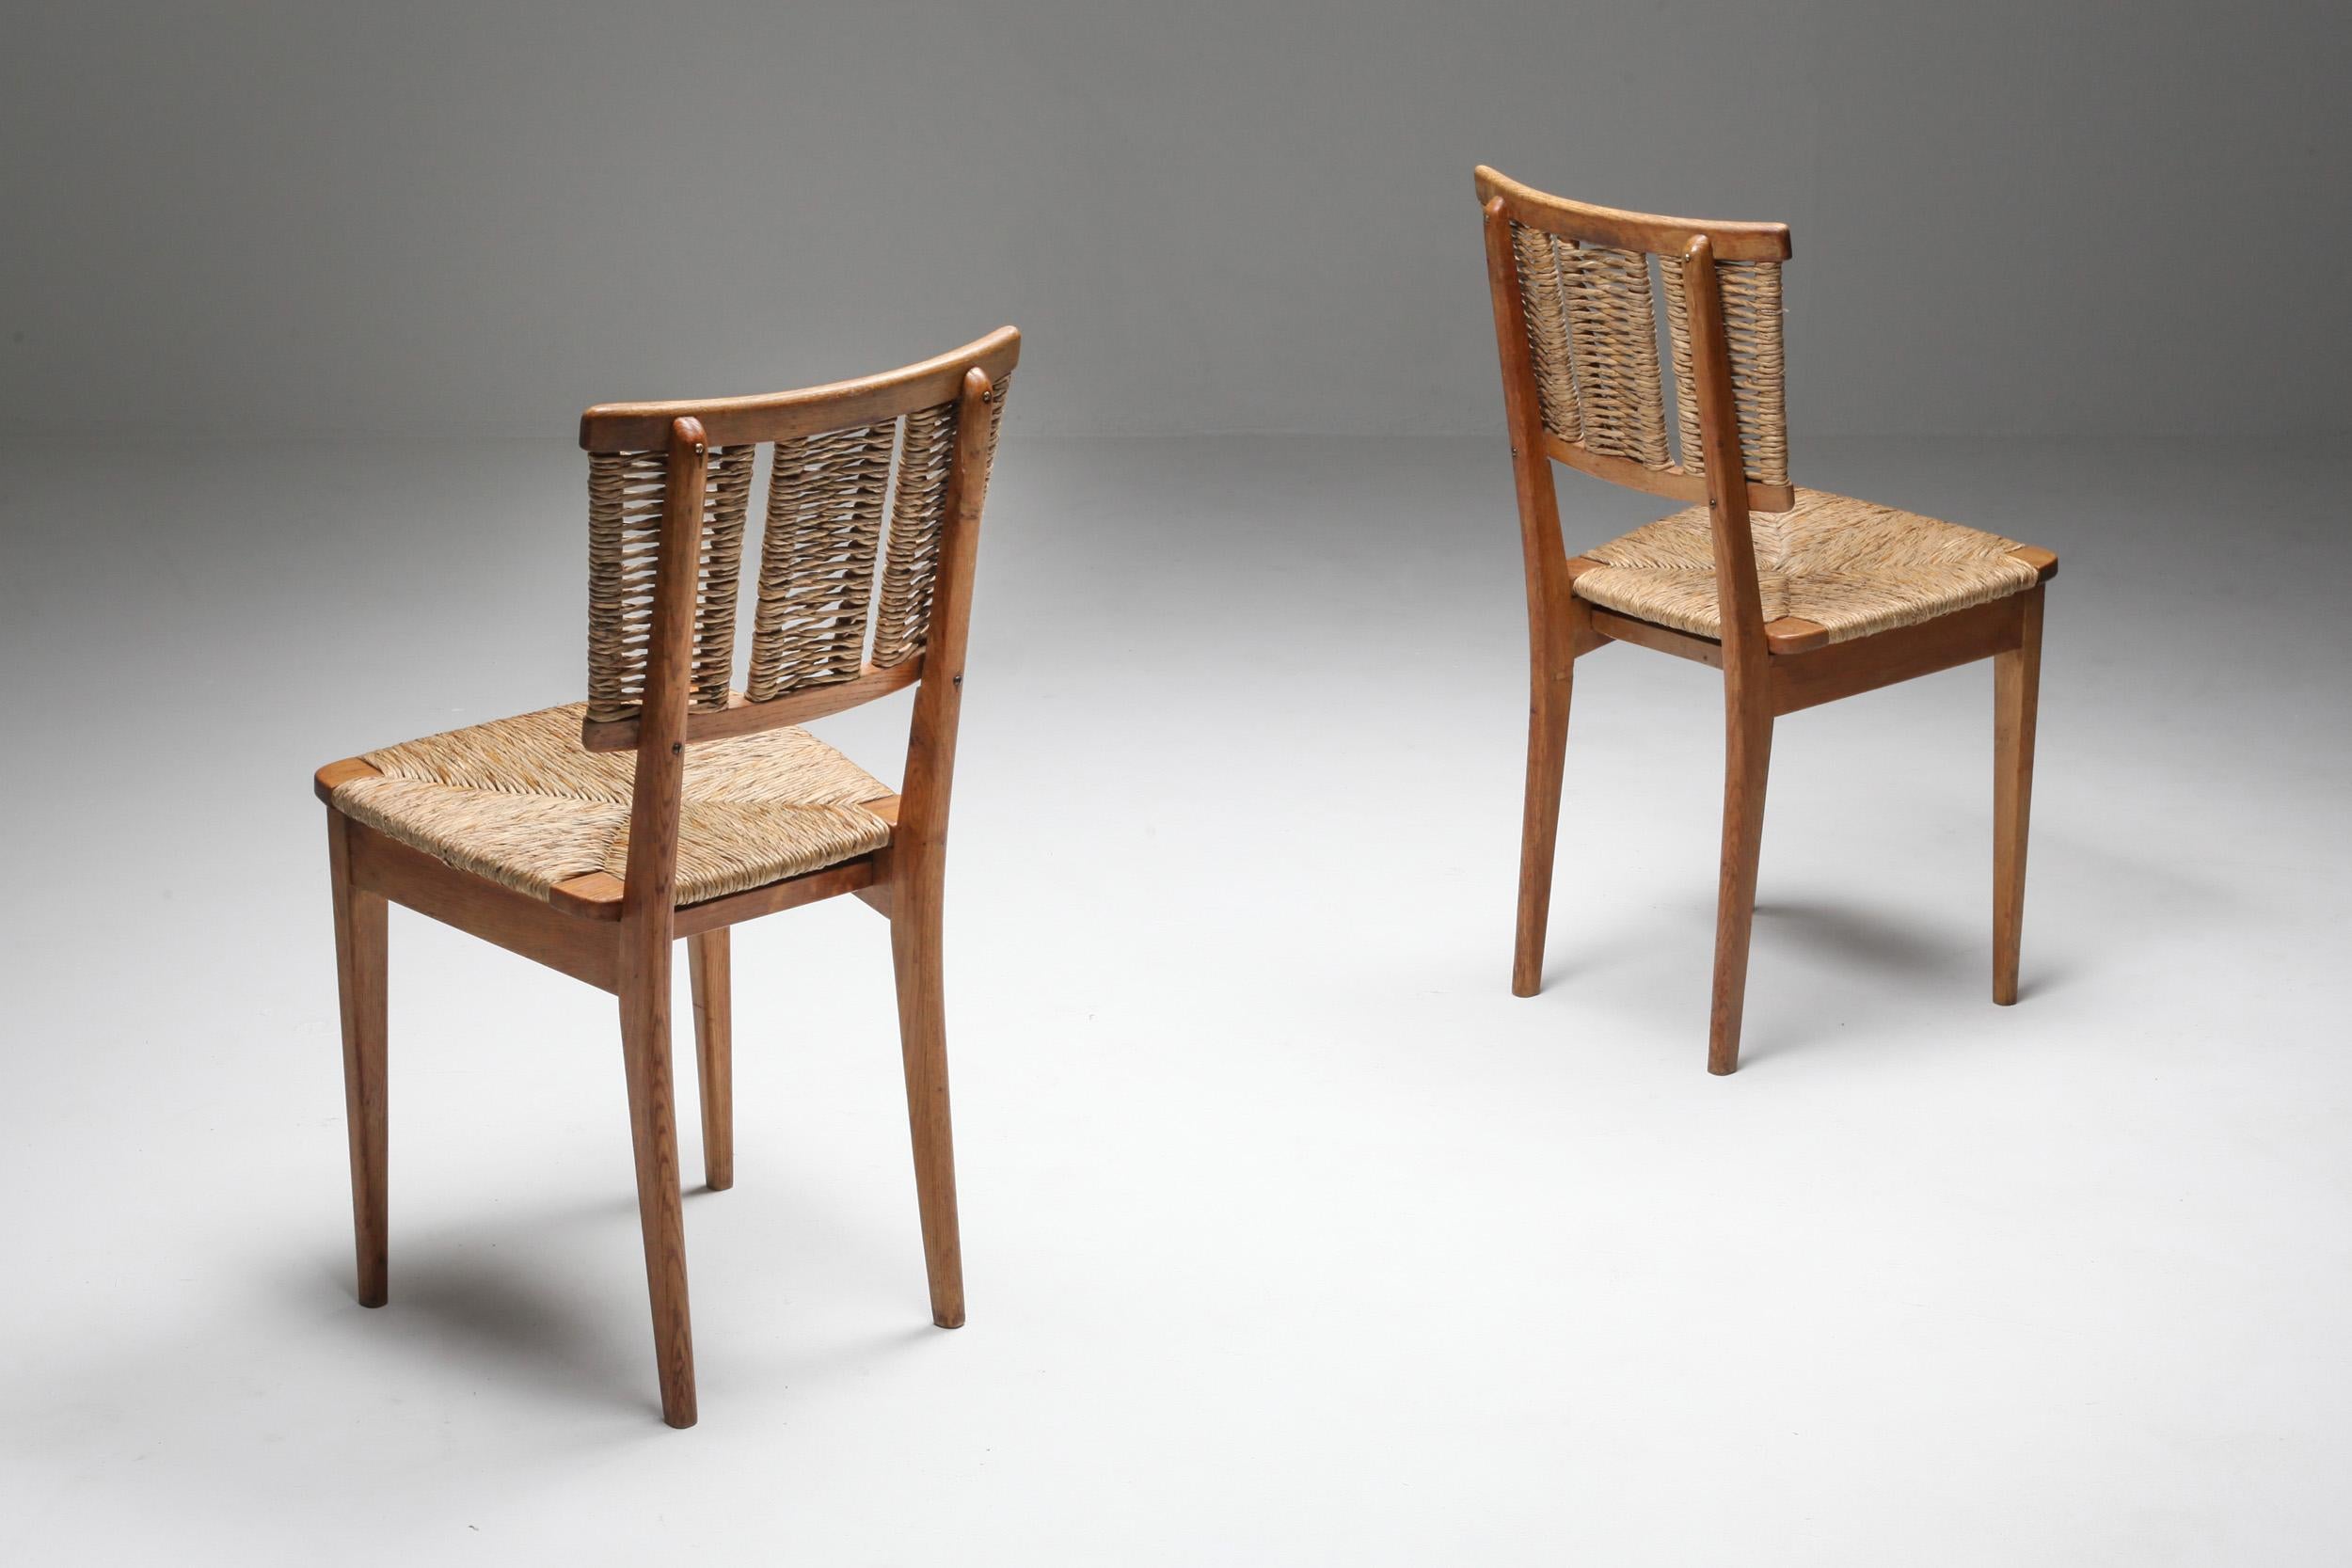 Modern Mart Stam 'A2-1' Chairs in Oak and Straw, 1947